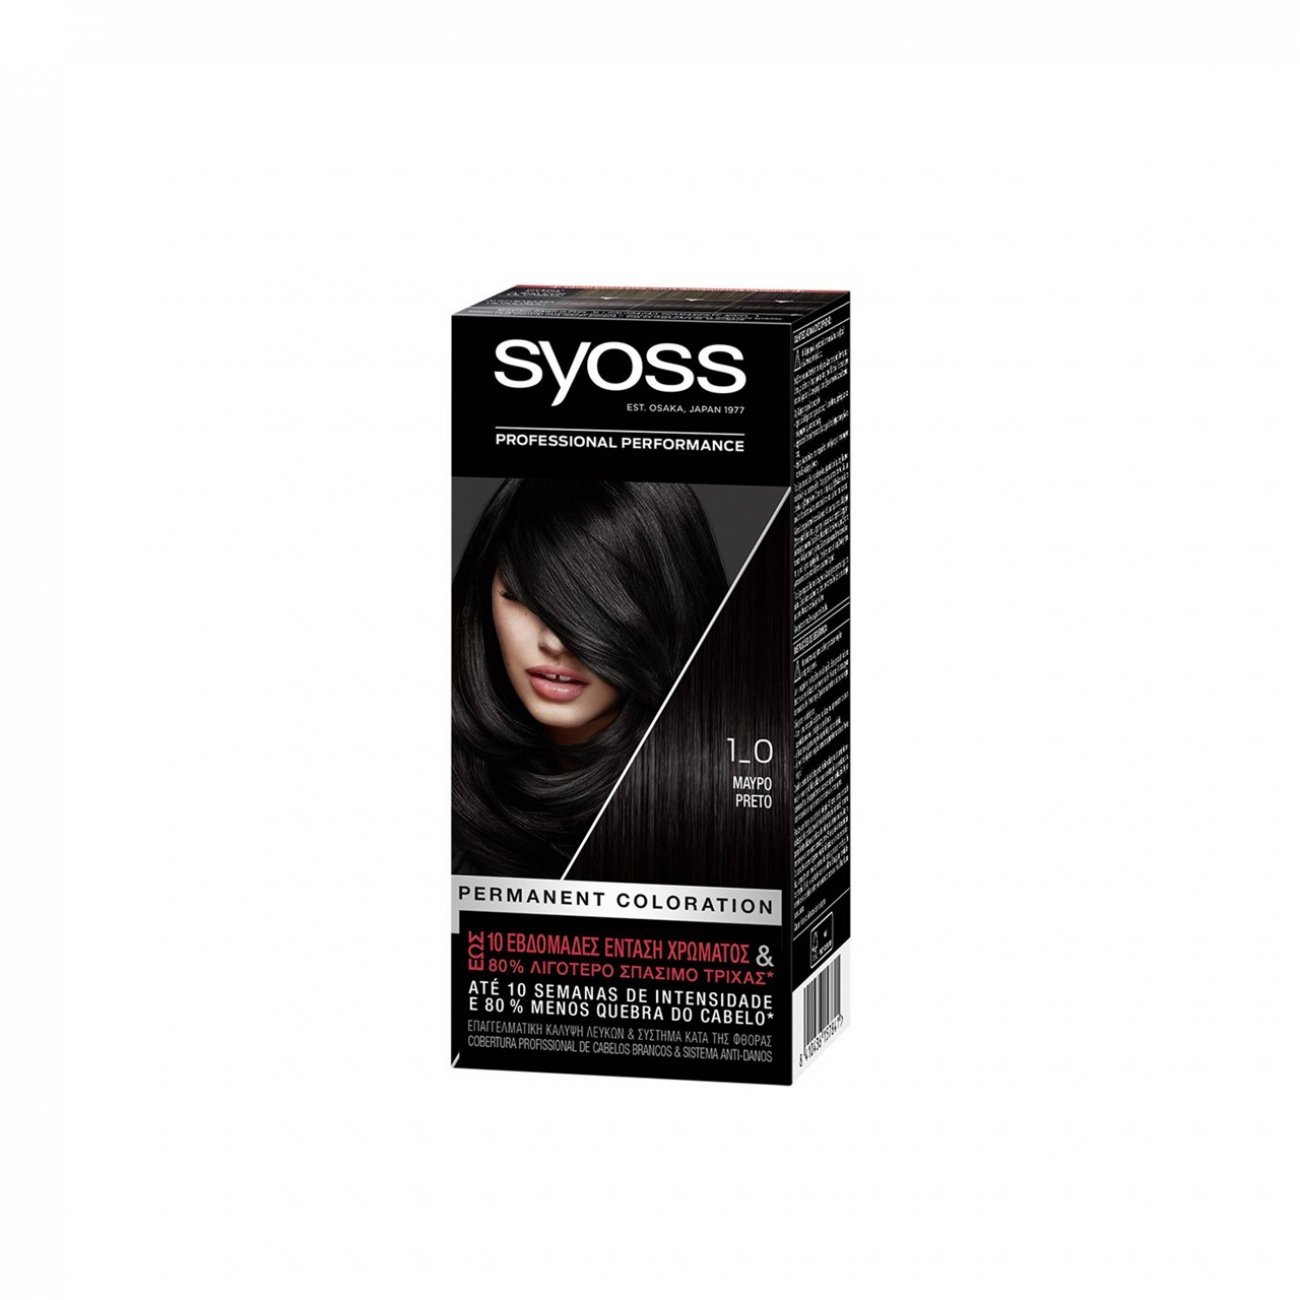 Buy Syoss Permanent Coloration 1_0 Black Permanent Hair Dye · World Wide